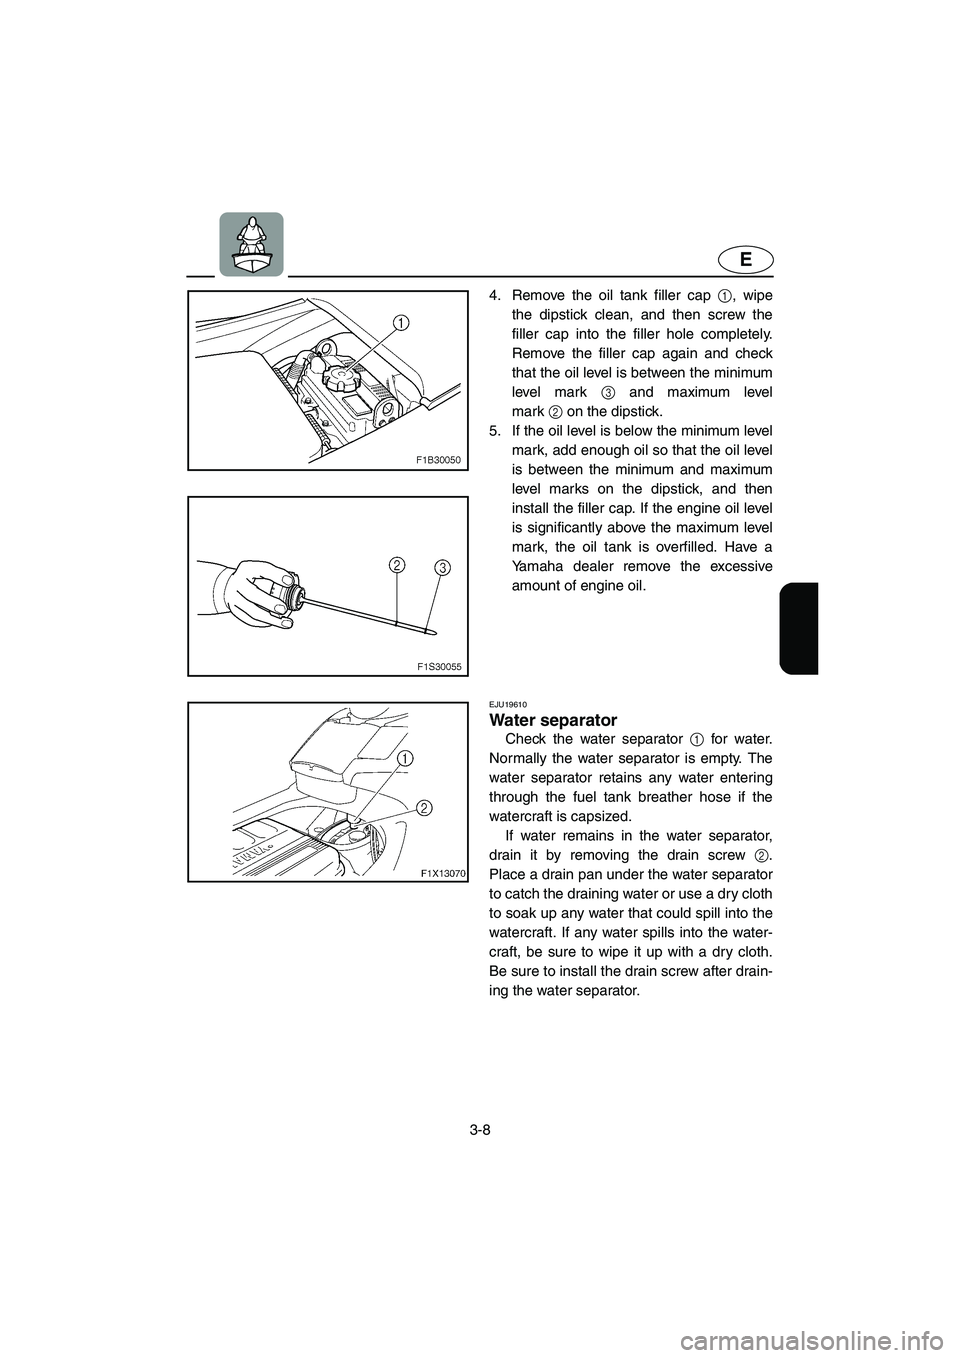 YAMAHA FX HO 2006 Manual PDF 3-8
E
4. Remove the oil tank filler cap 1, wipe
the dipstick clean, and then screw the
filler cap into the filler hole completely.
Remove the filler cap again and check
that the oil level is between t